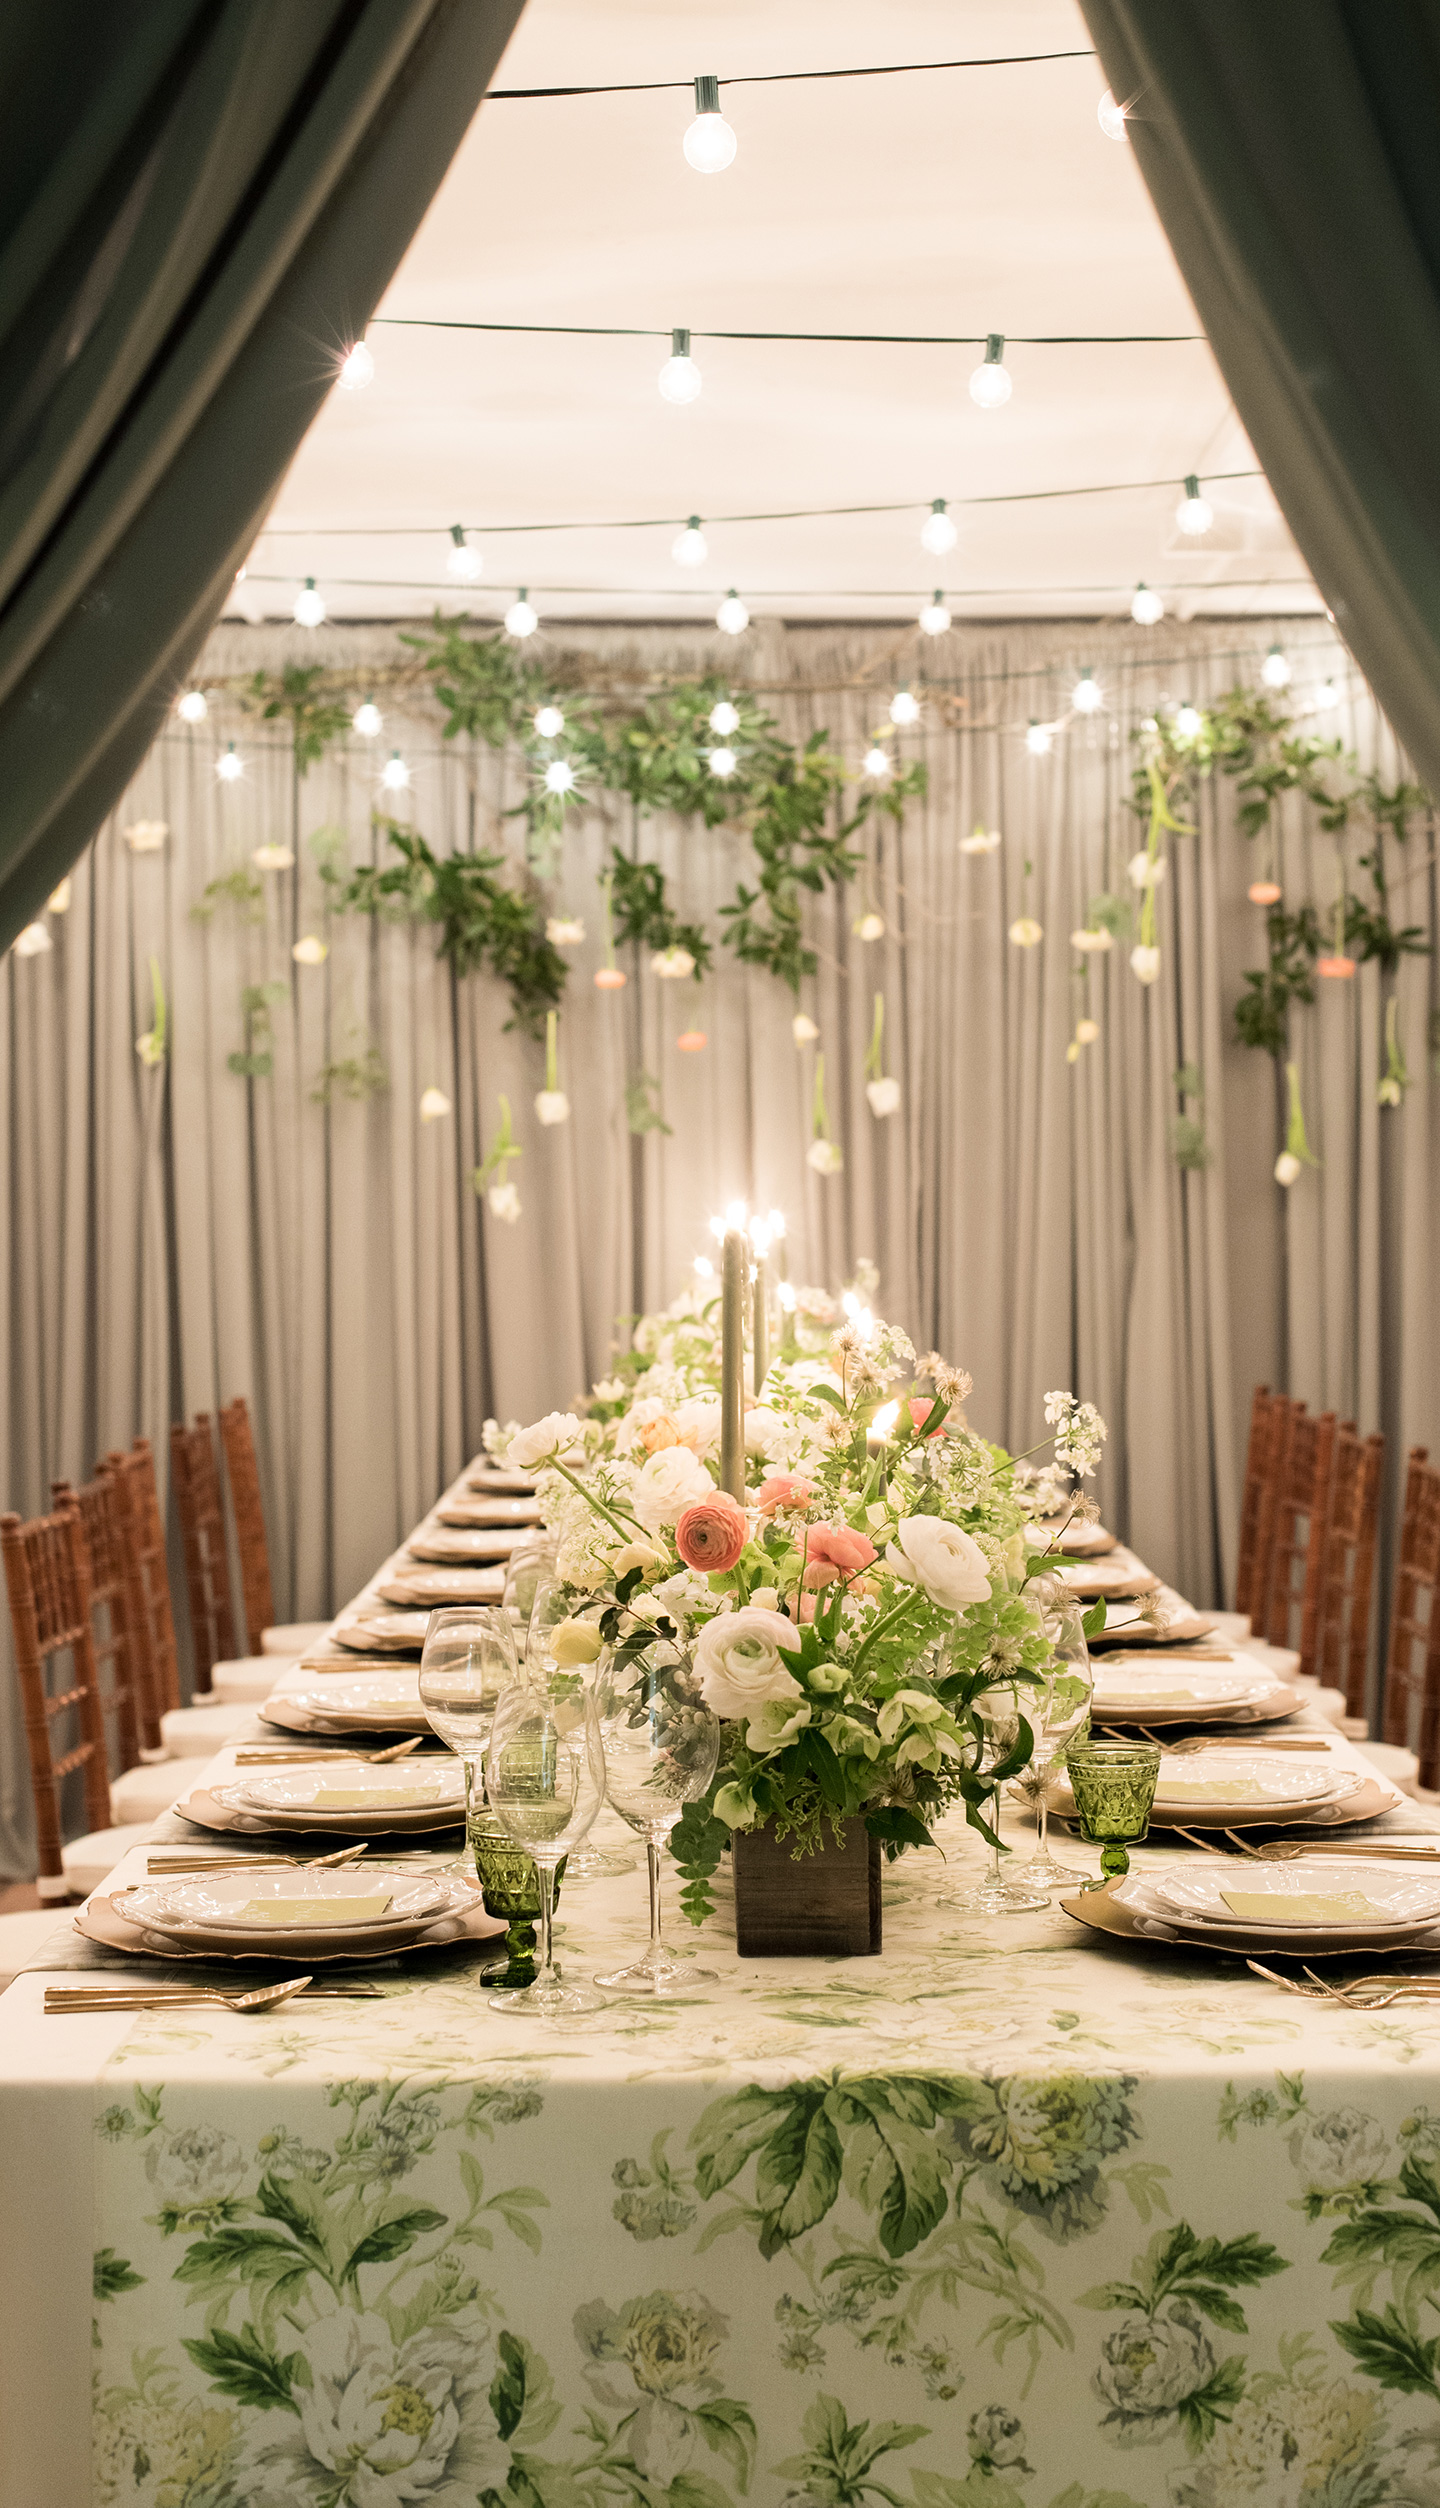 This is 30 | An Indoor Garden Dinner Party - Color By K